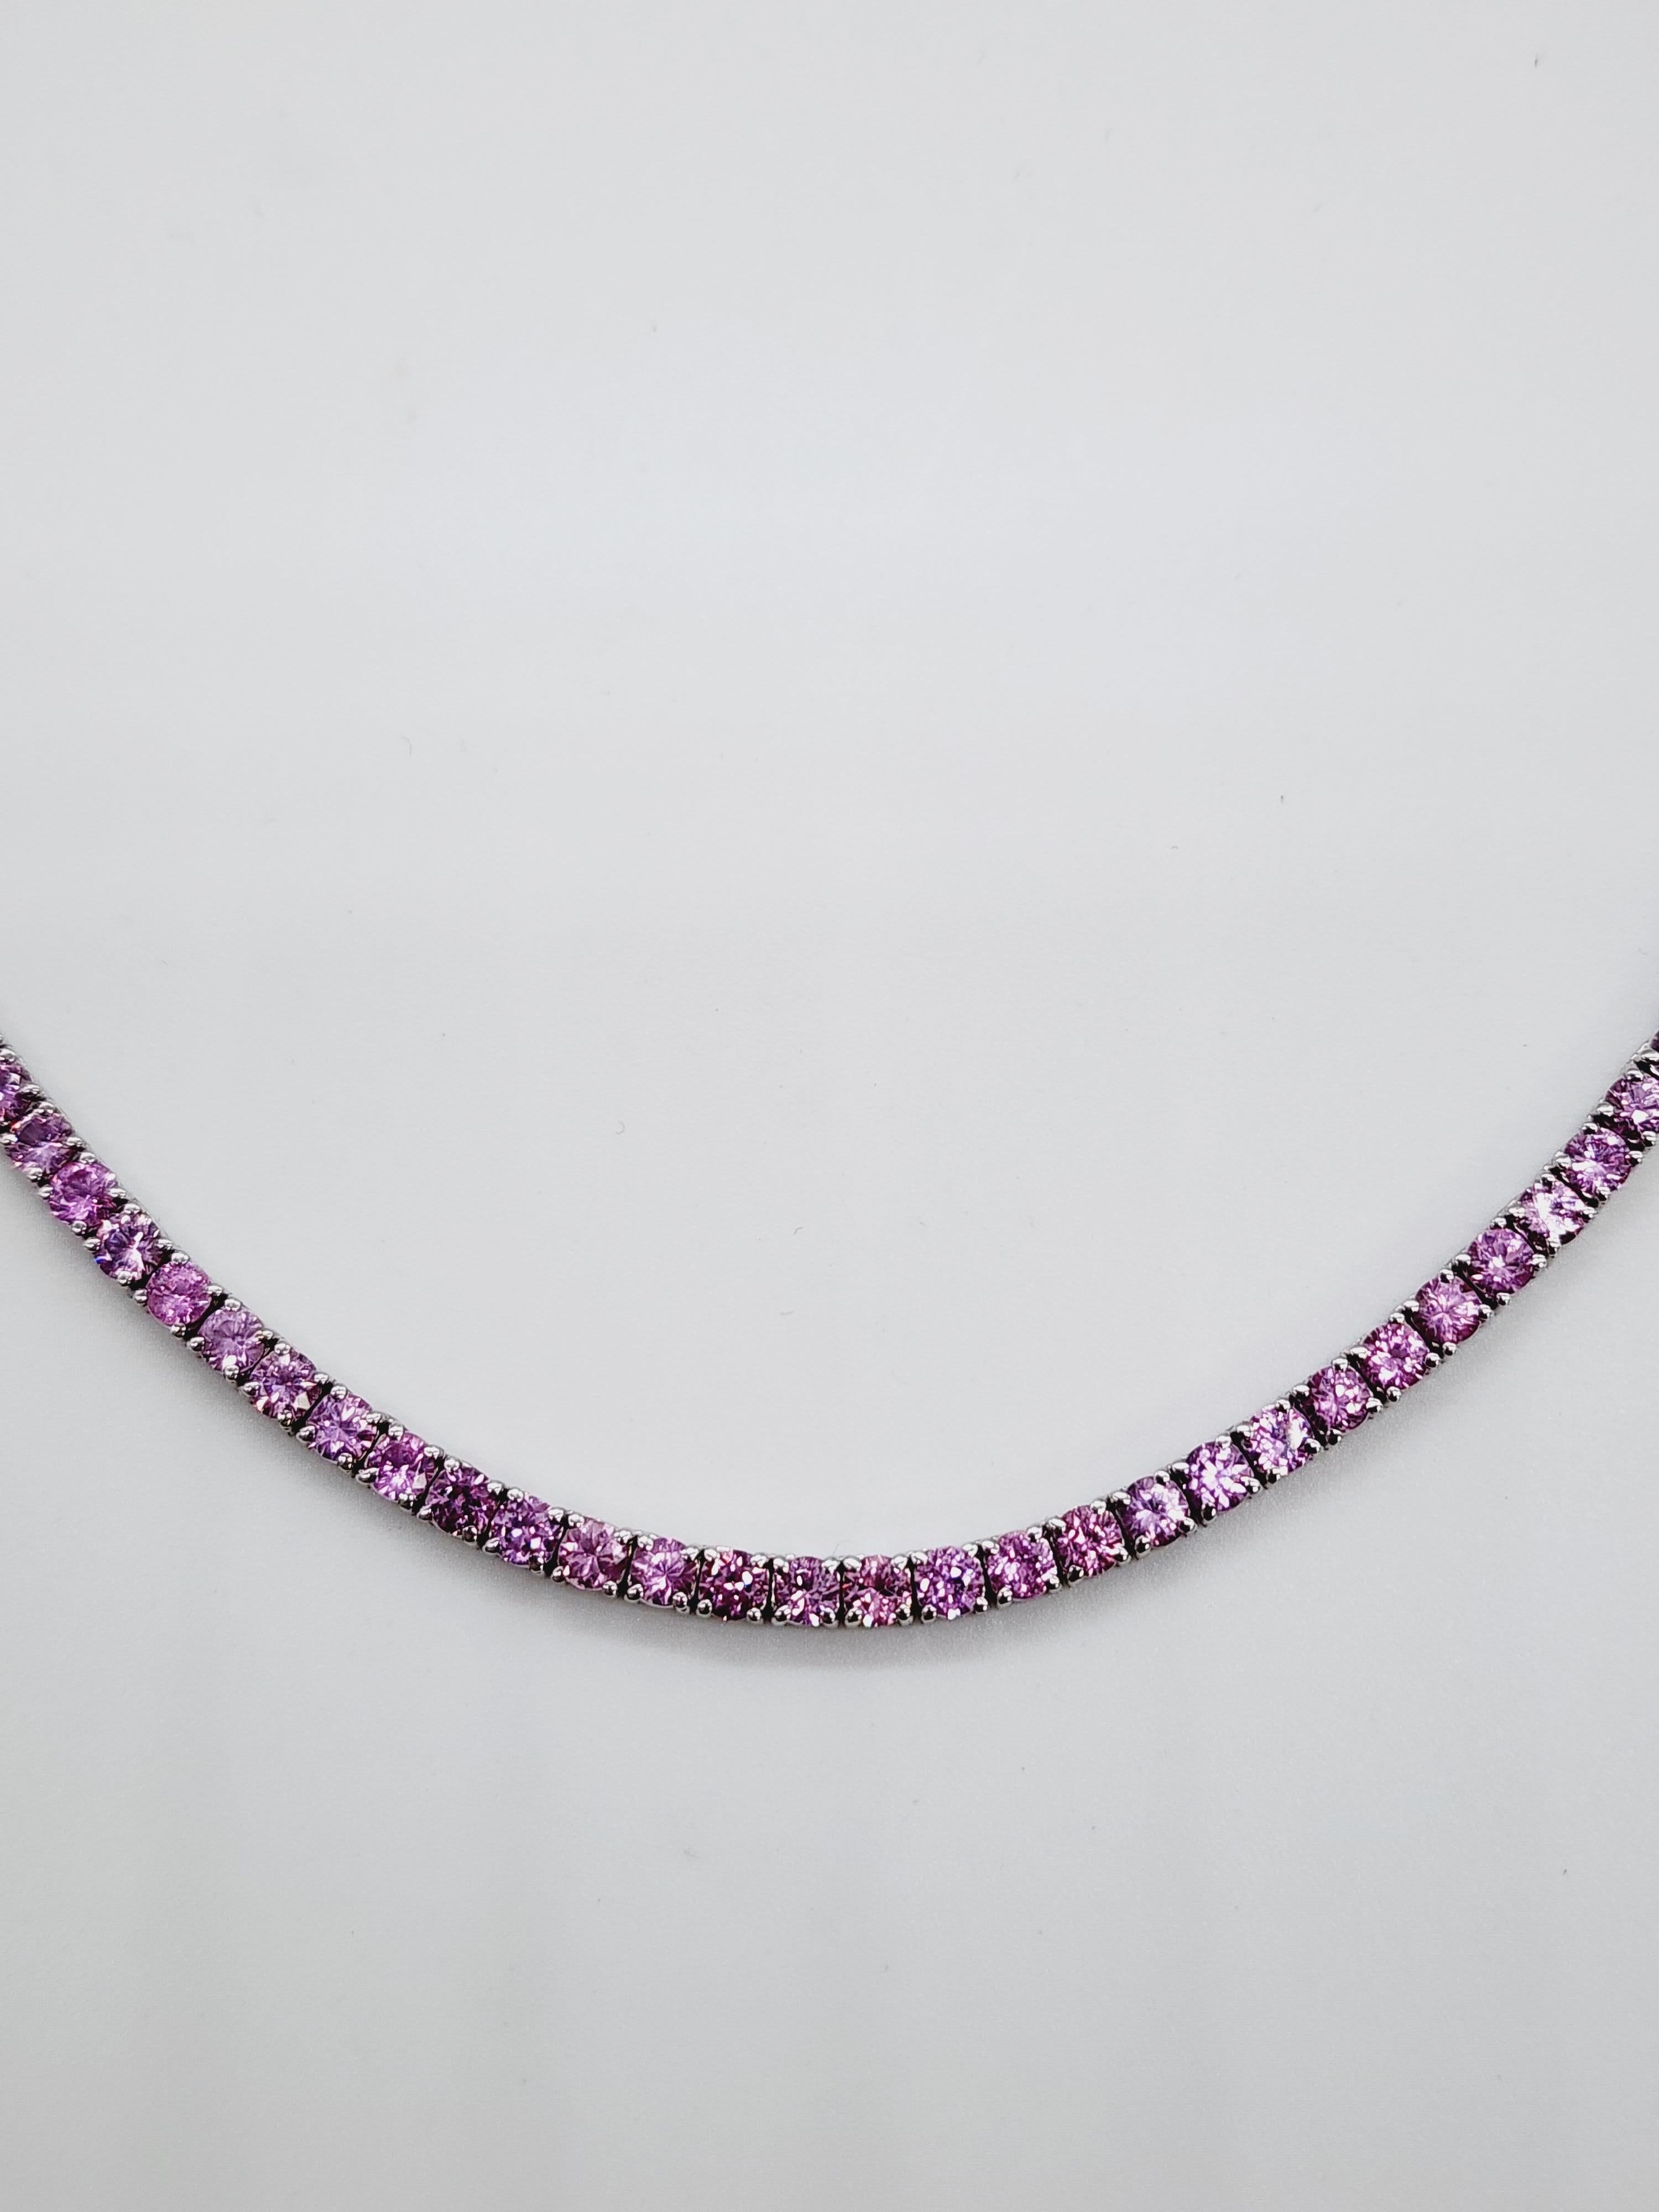 16.80 Carats Pink Sapphire Tennis Necklace 14 Karat White Gold 16'' In New Condition For Sale In Great Neck, NY